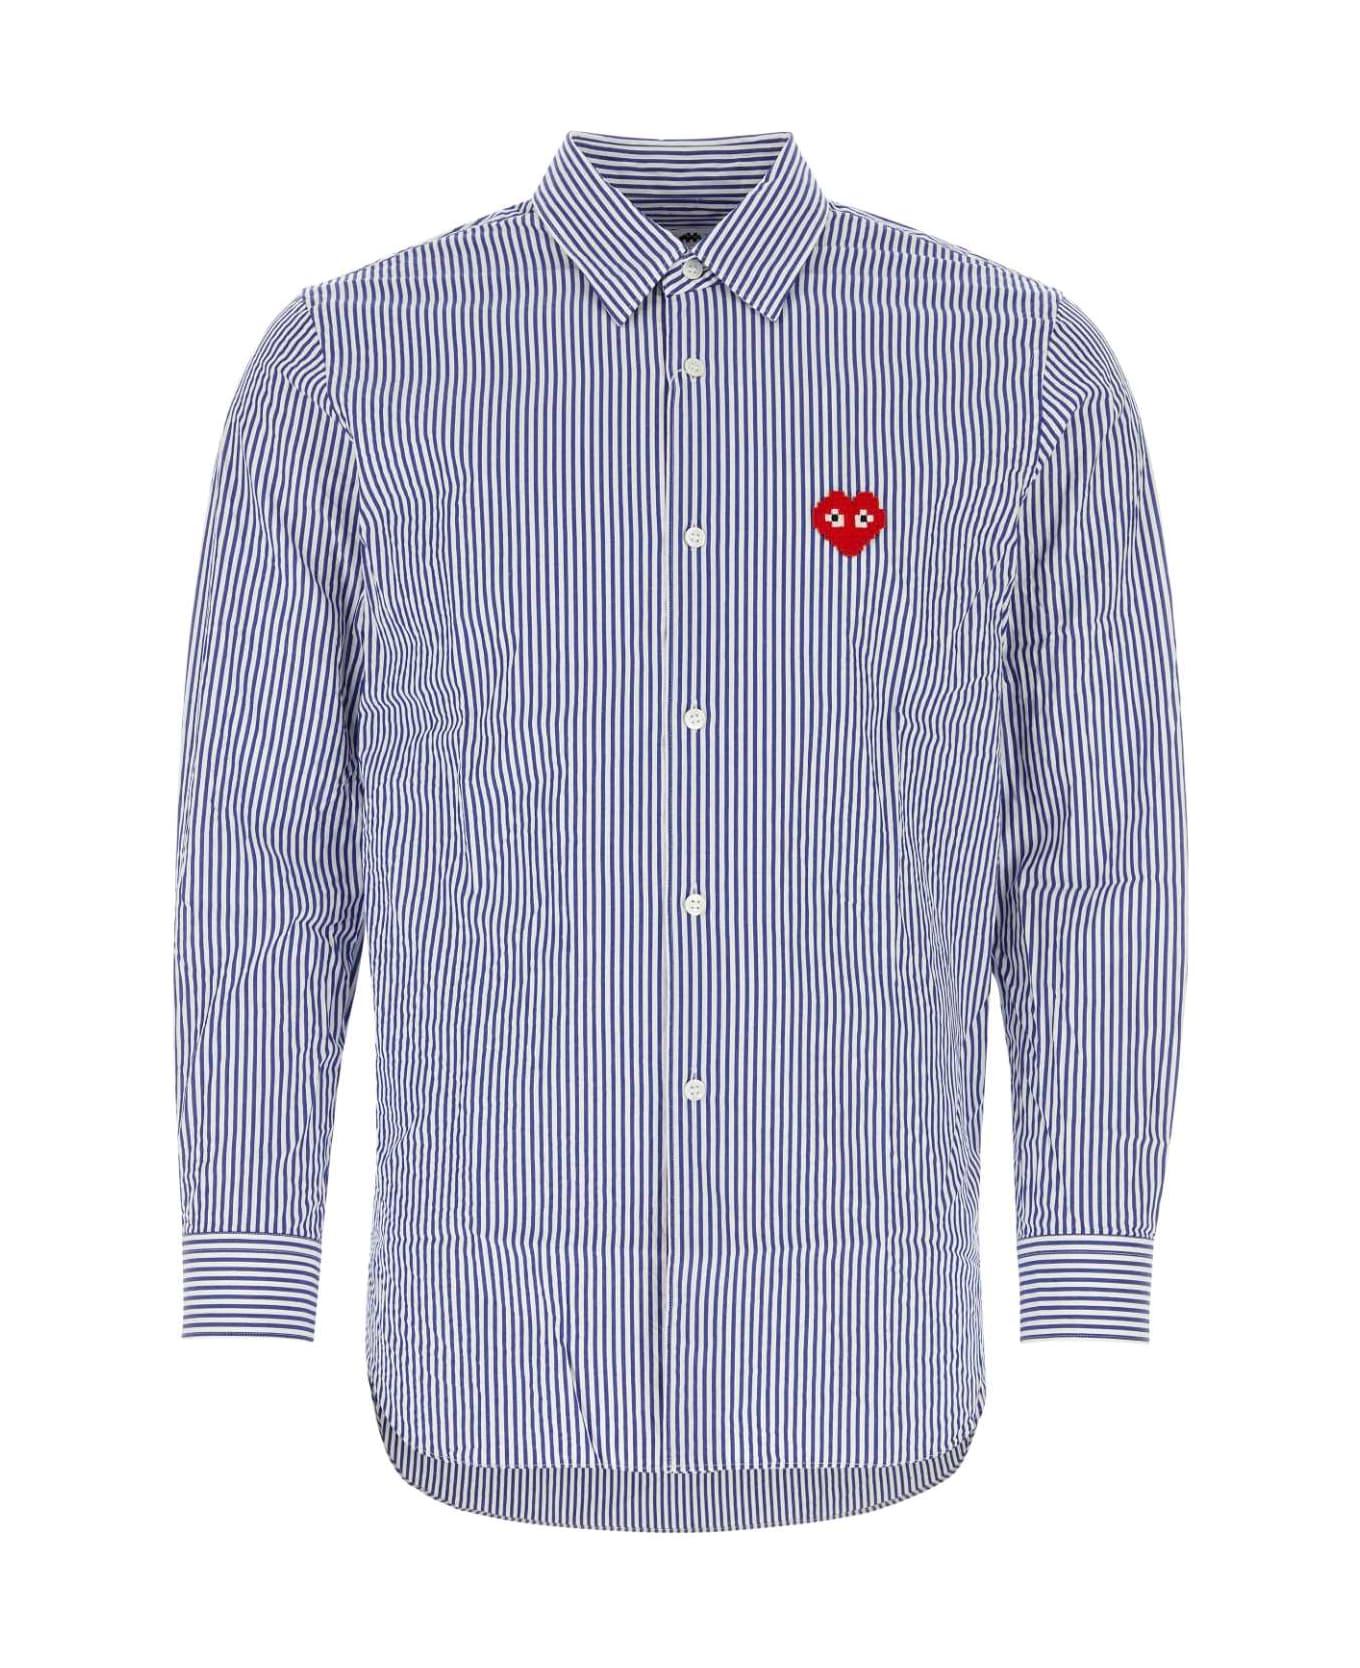 Comme des Garçons Play Embroidered Cotton Shirt - BLUEWHTSTRIPES